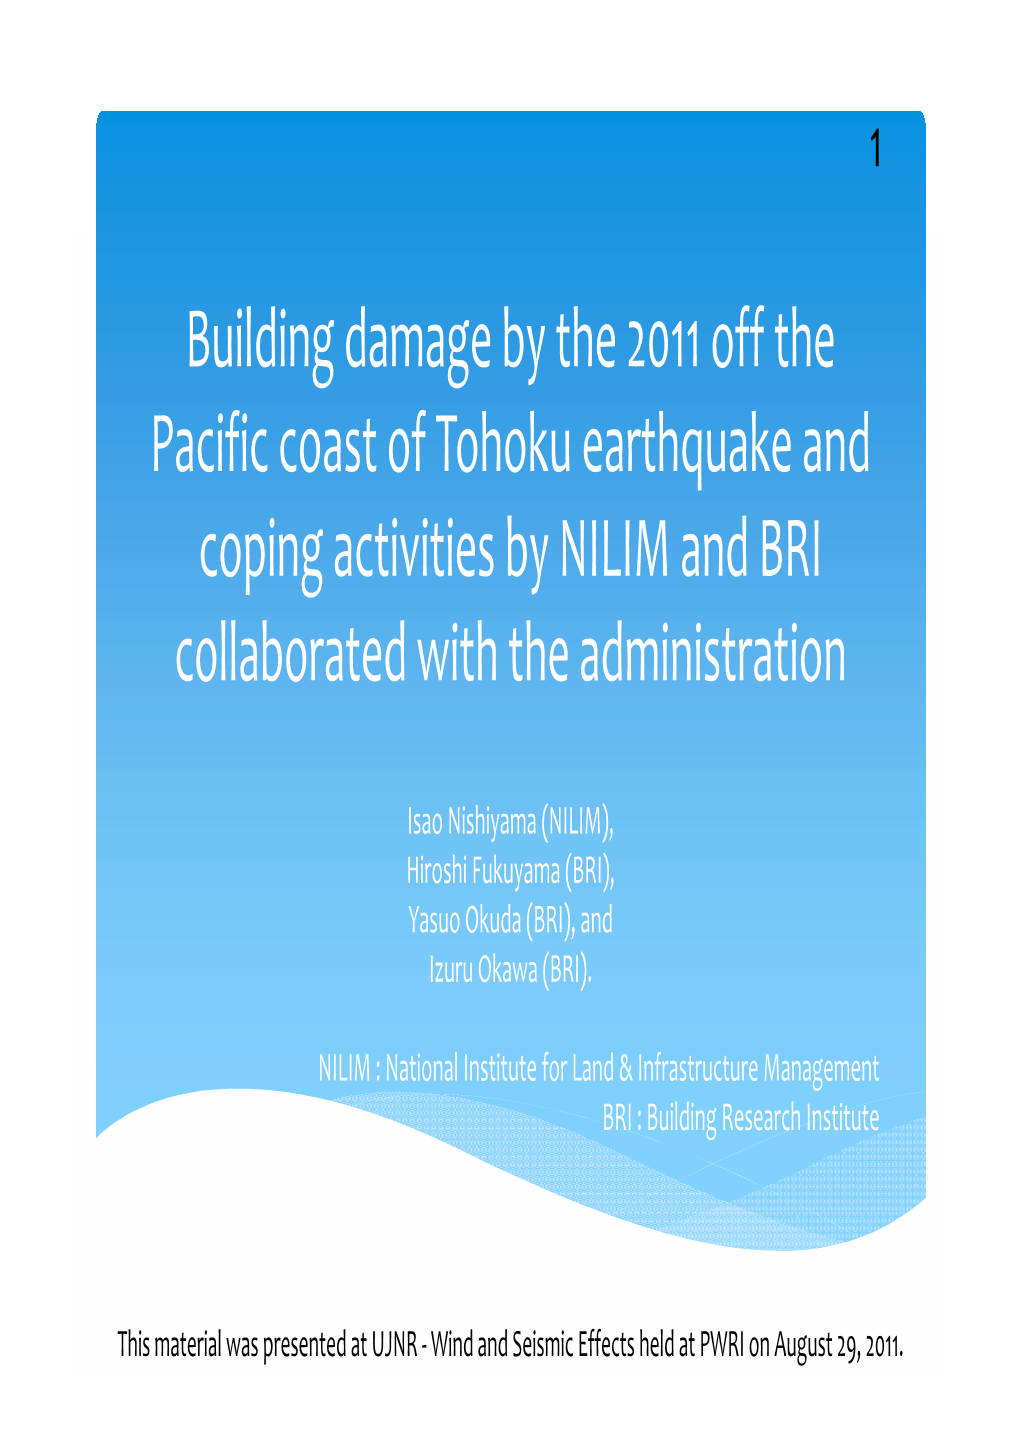 Building Damage by the 2011 Off the Pacific Coast of Tohoku Earthquake and Coping Activities by NILIM and BRI Collaborated with the Administration